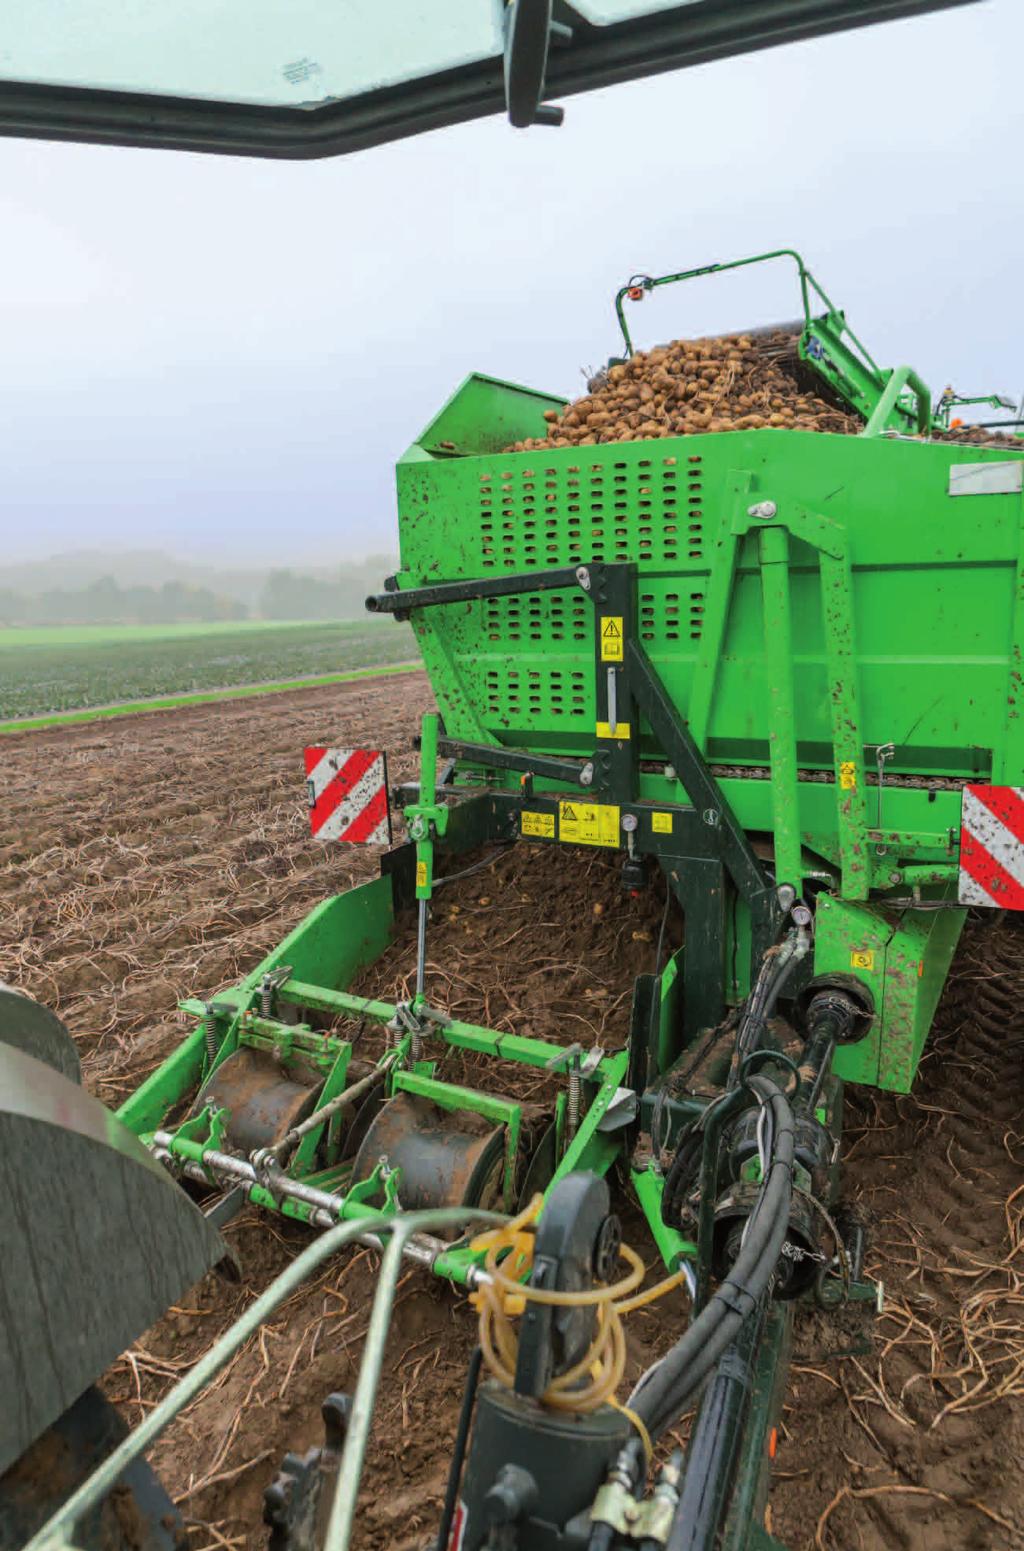 More flexibility, capacity and comfort Extra haulm separation The third sieving web or cross roller set